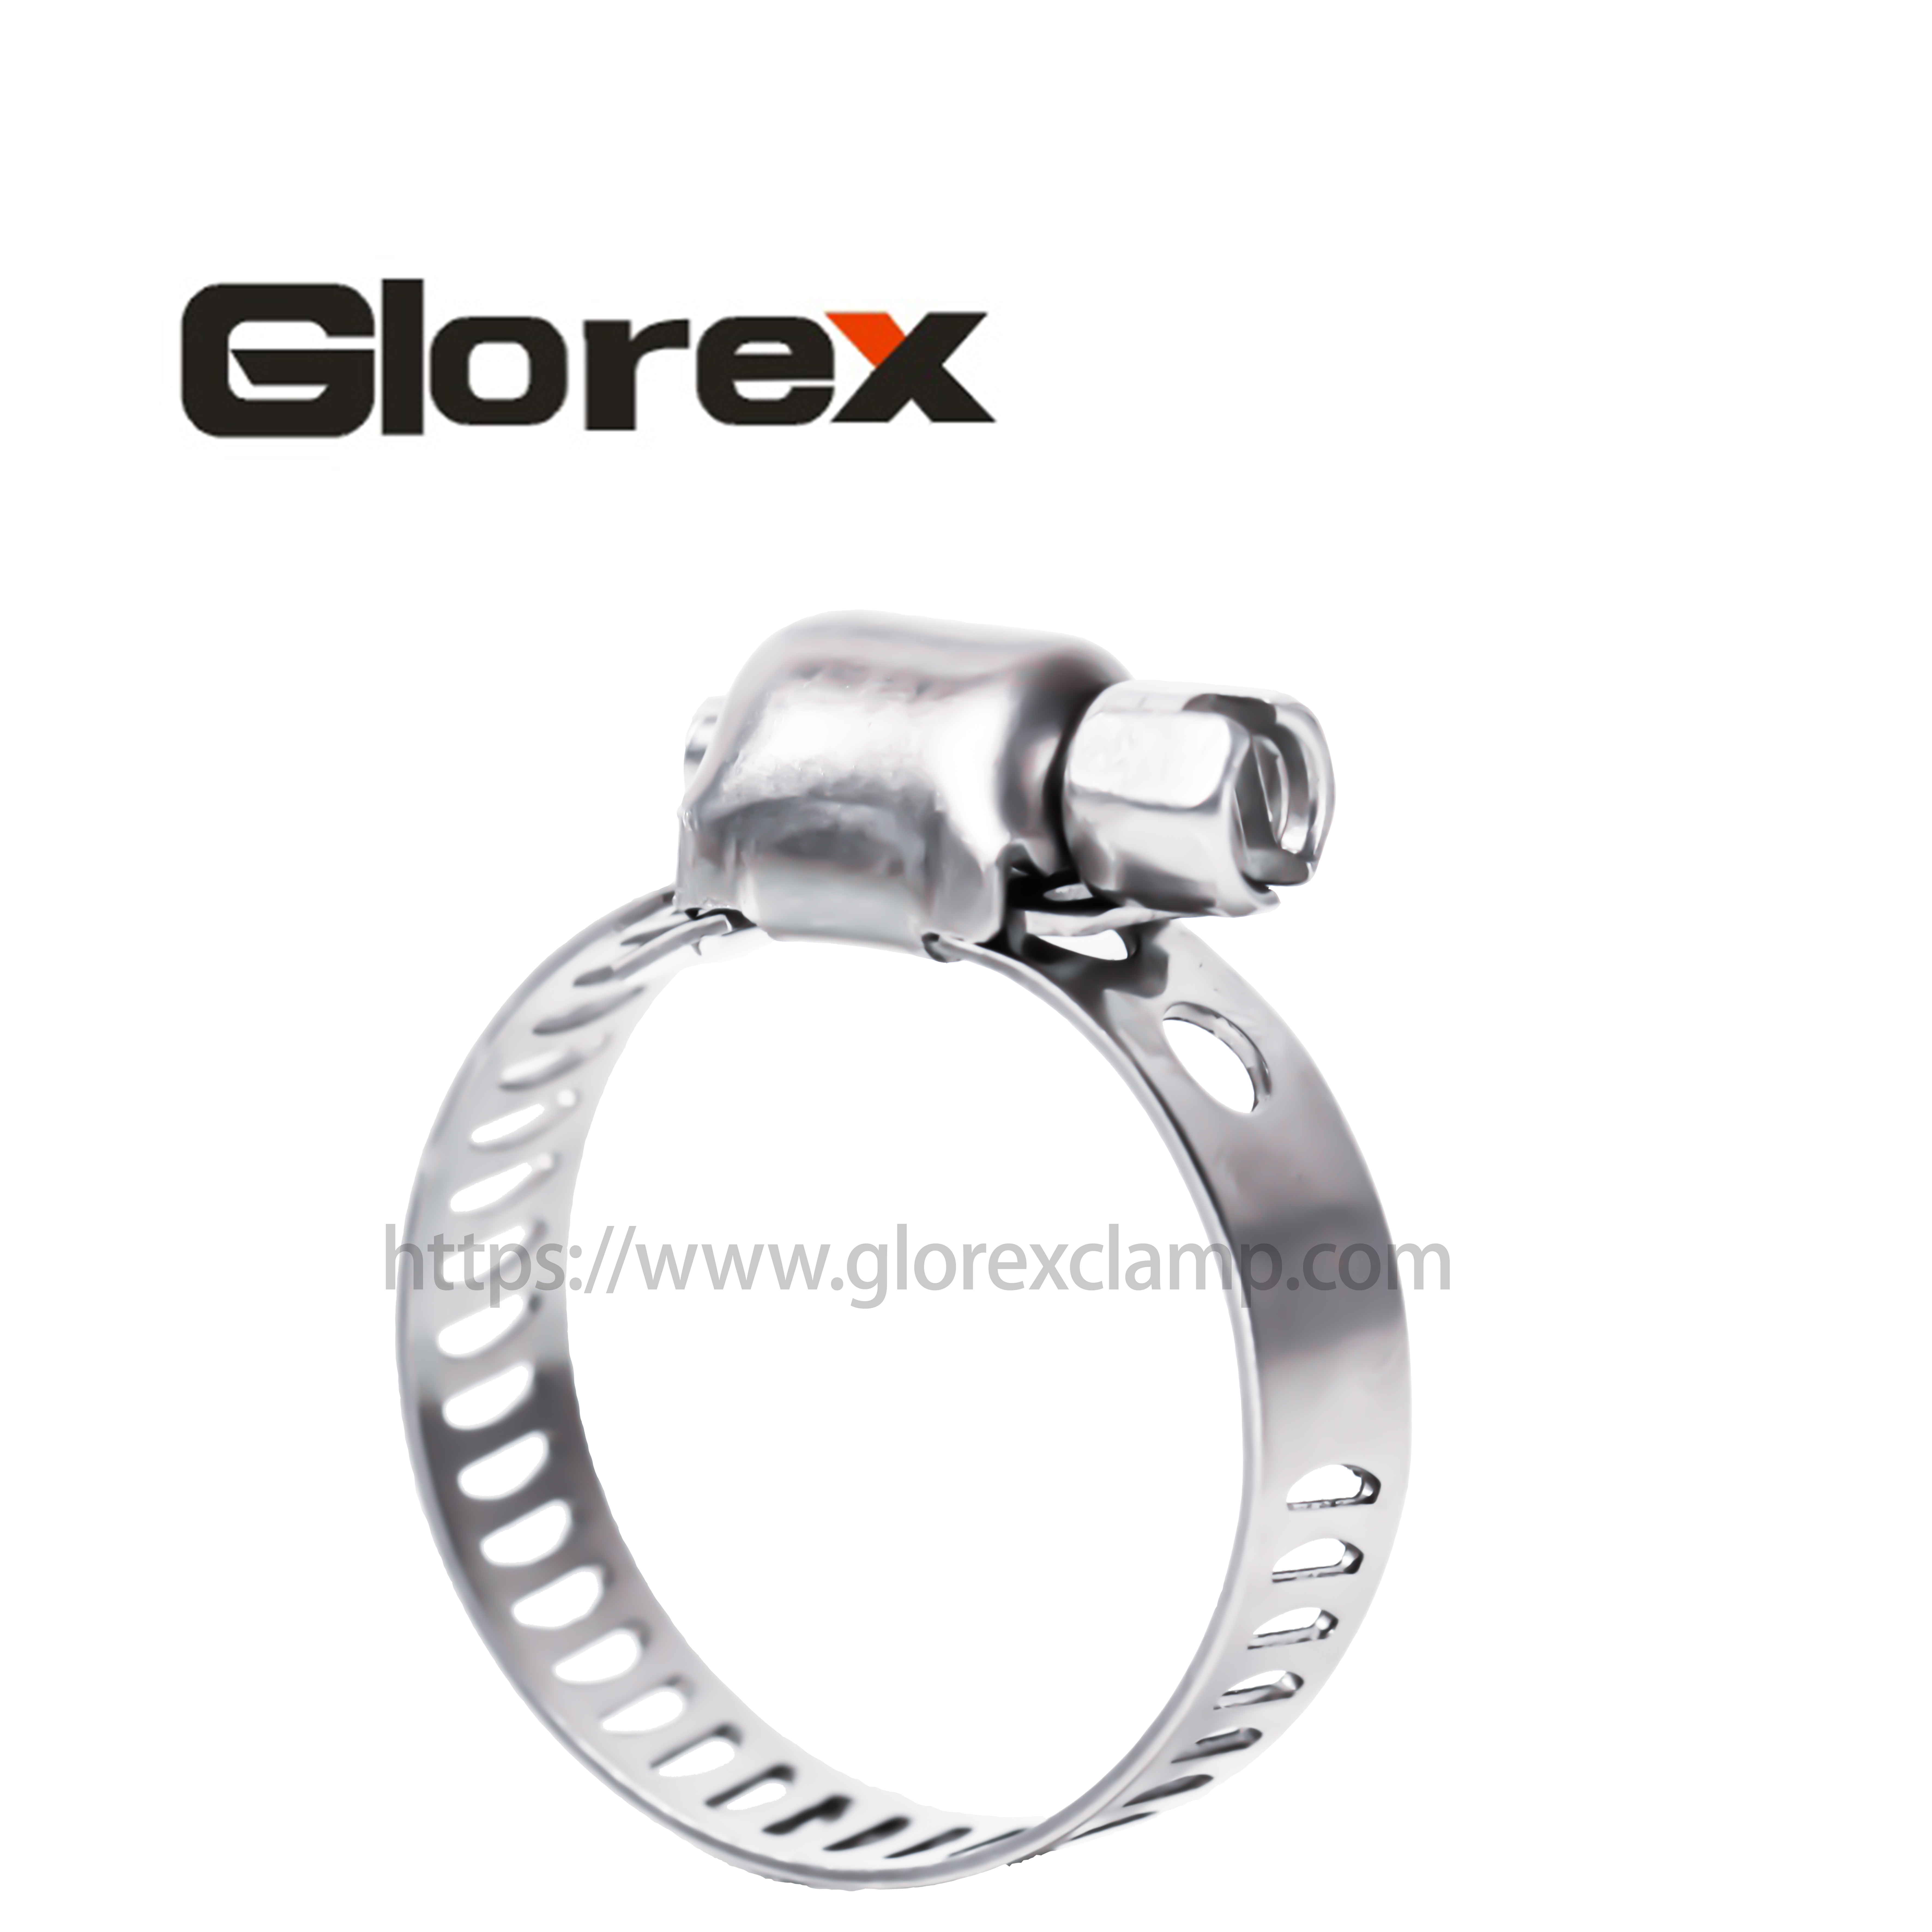 Discountable price Hose Clamp Fittings - 8mm American type hose clamp – Glorex